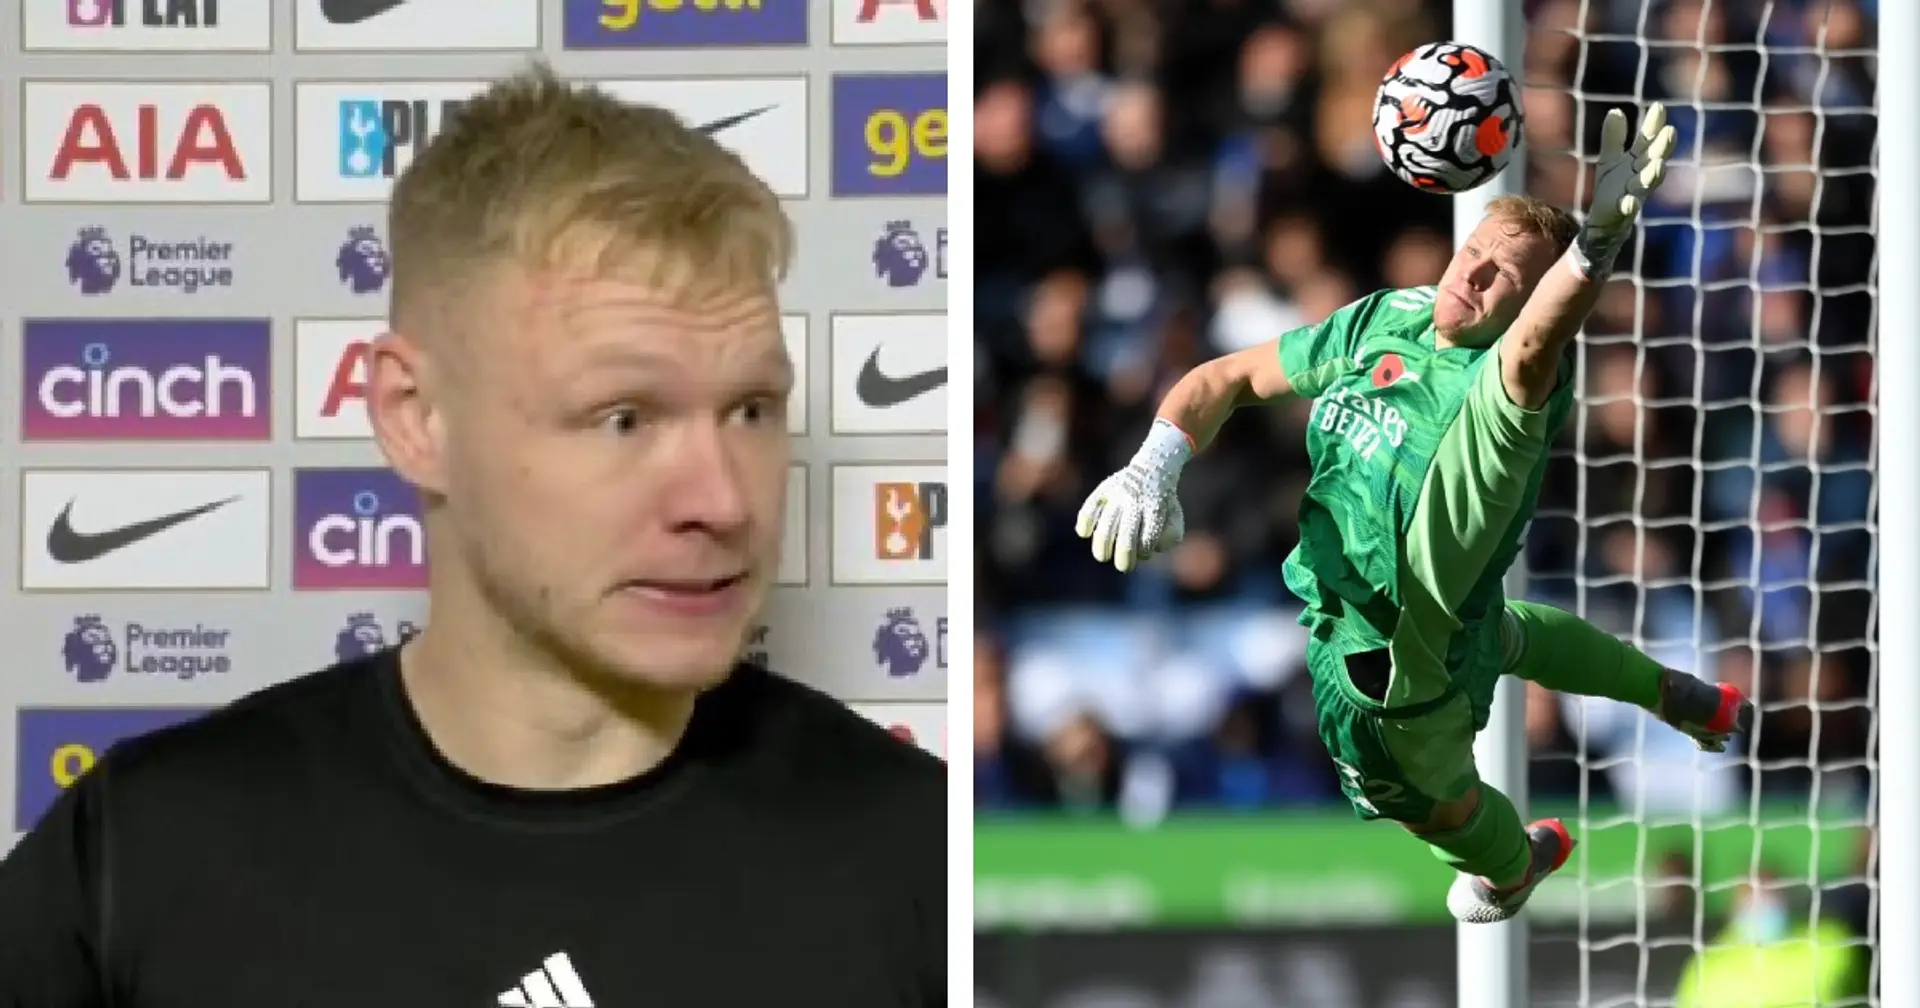 Ramsdale names two goalkeeping legends who inspired him as a kid - one is a World Cup winner  